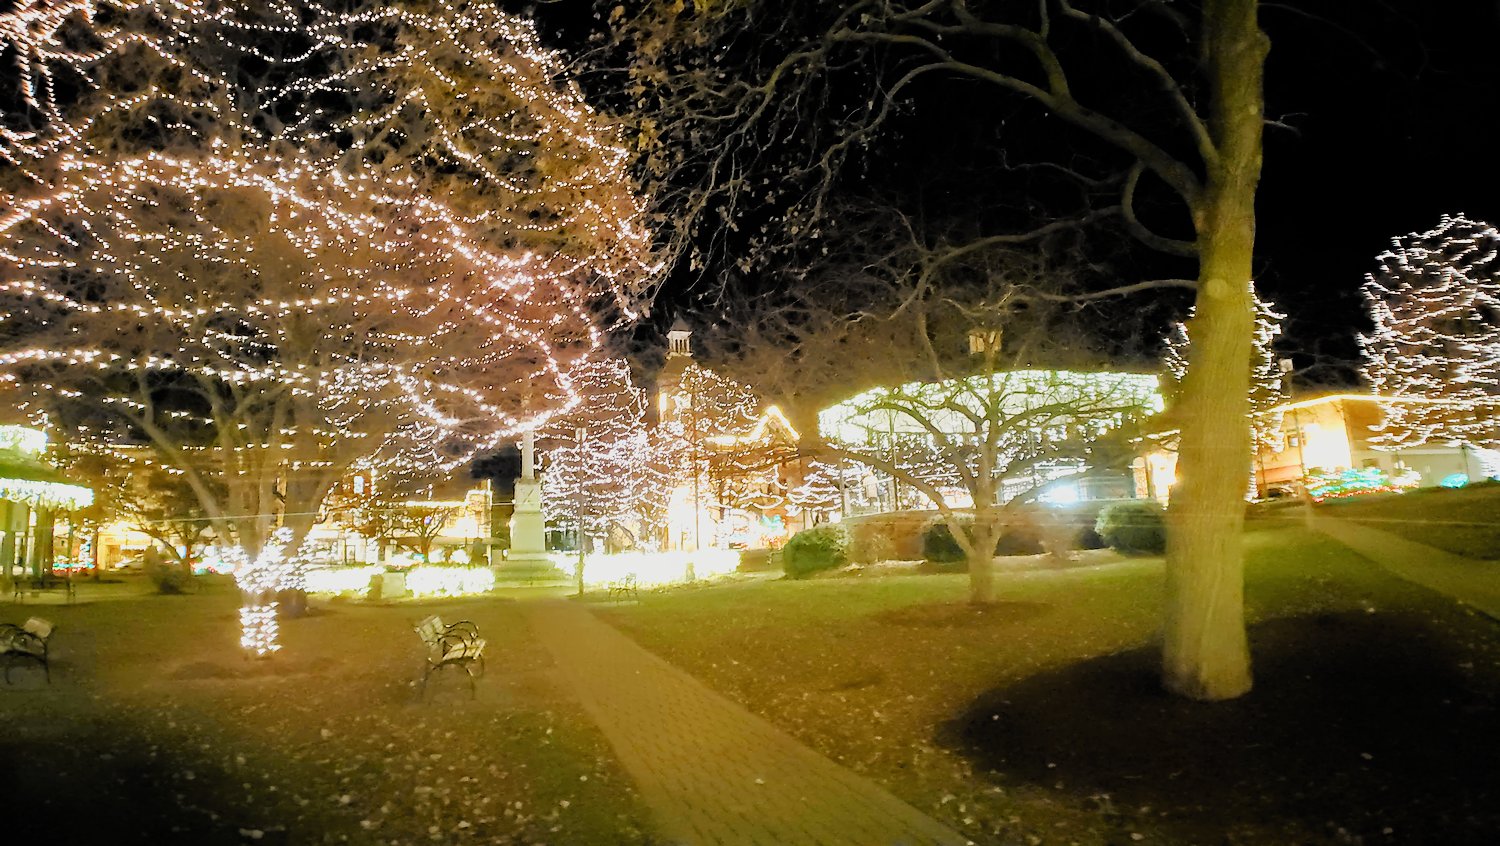 Lights on the trees, bushes, and band stand at the Historic Square in Woodstock, IL.